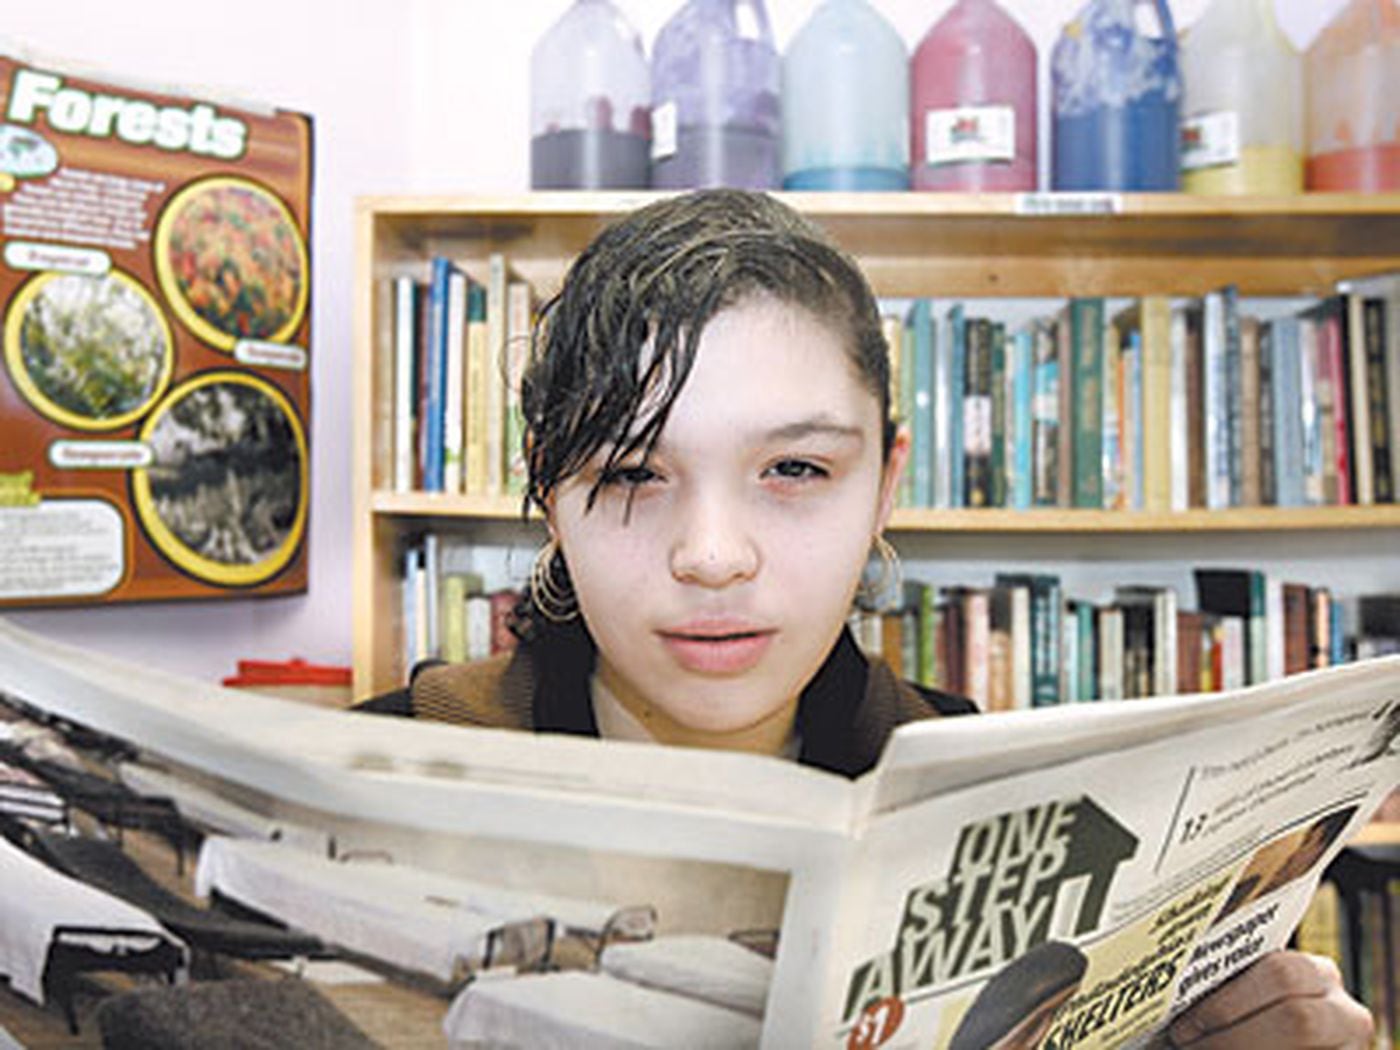 Thirteen-year-old Stephanie Bermudez holds a copy of One Step Away in the library of Woodstock Shelter in North Philadelphia in 2009. ( Bonnie Weller / Staff Photographer )